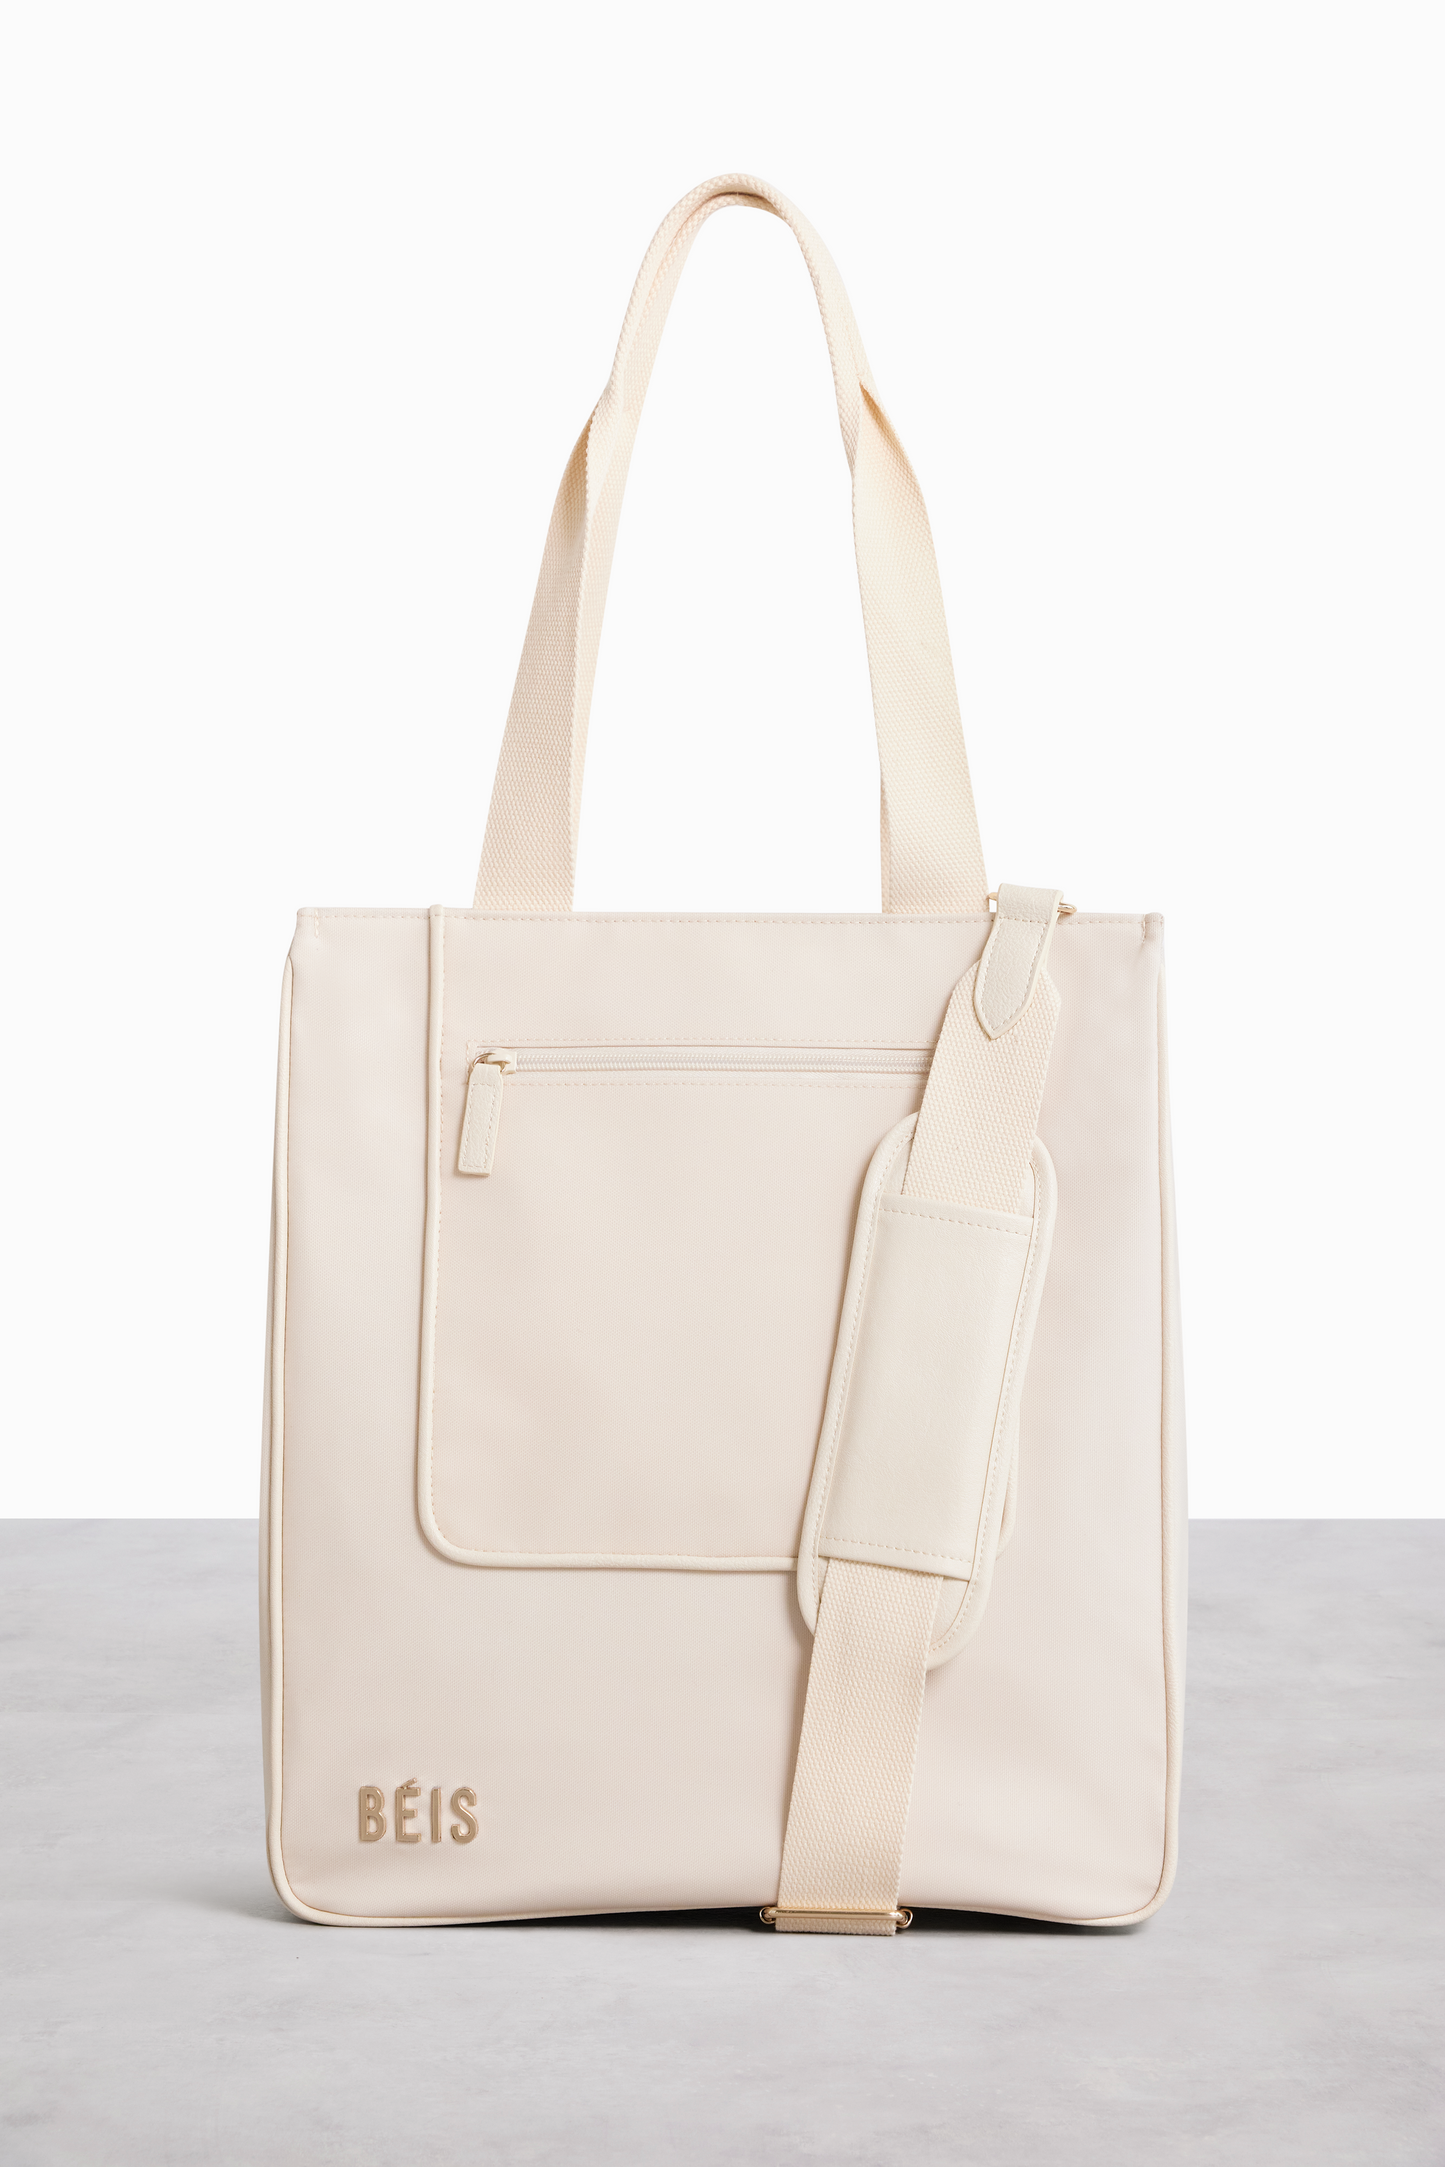 The North To South Tote in Beige